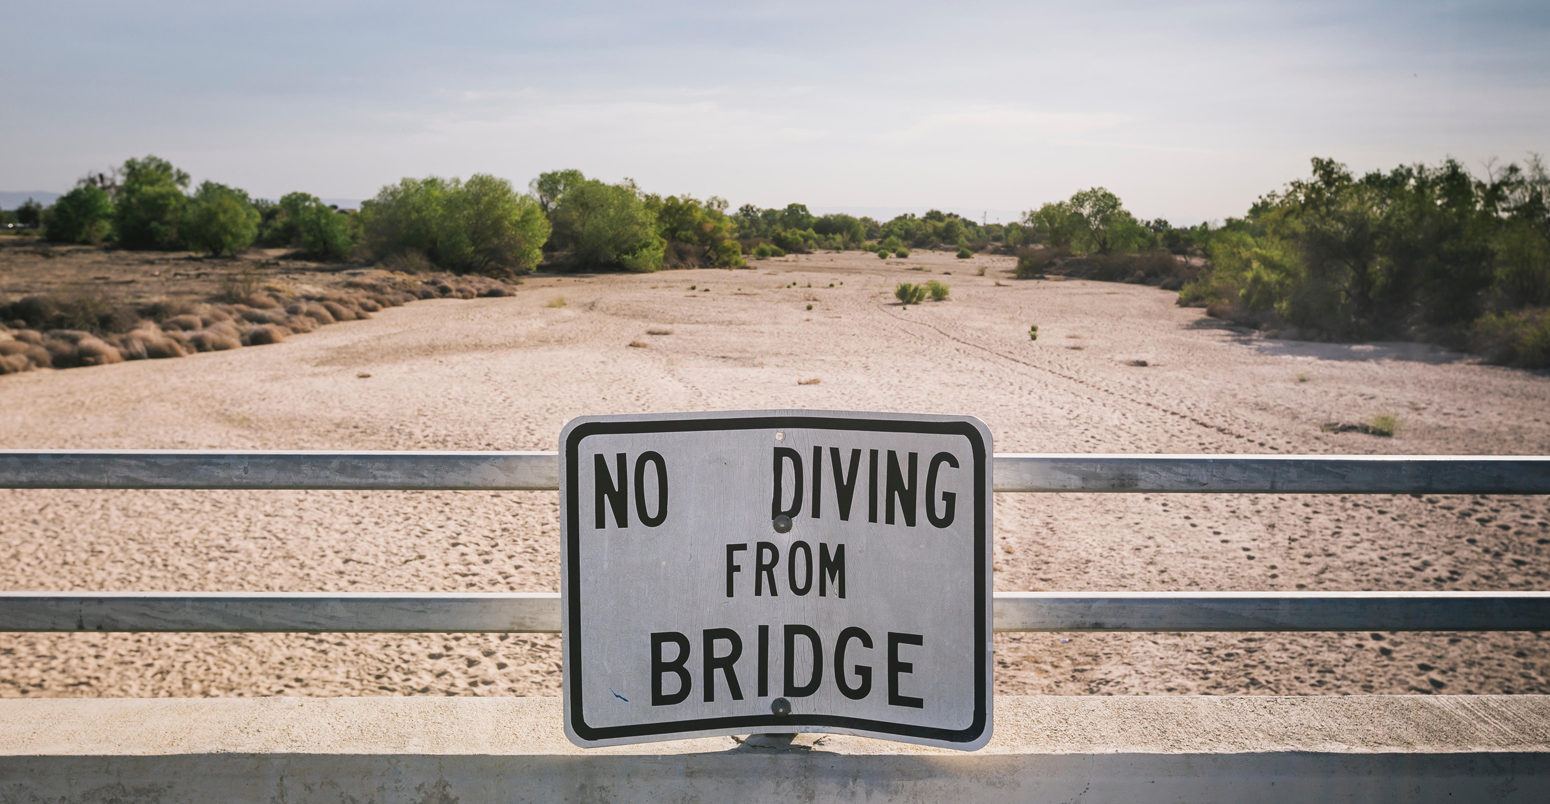 Bridge in California over dried up river